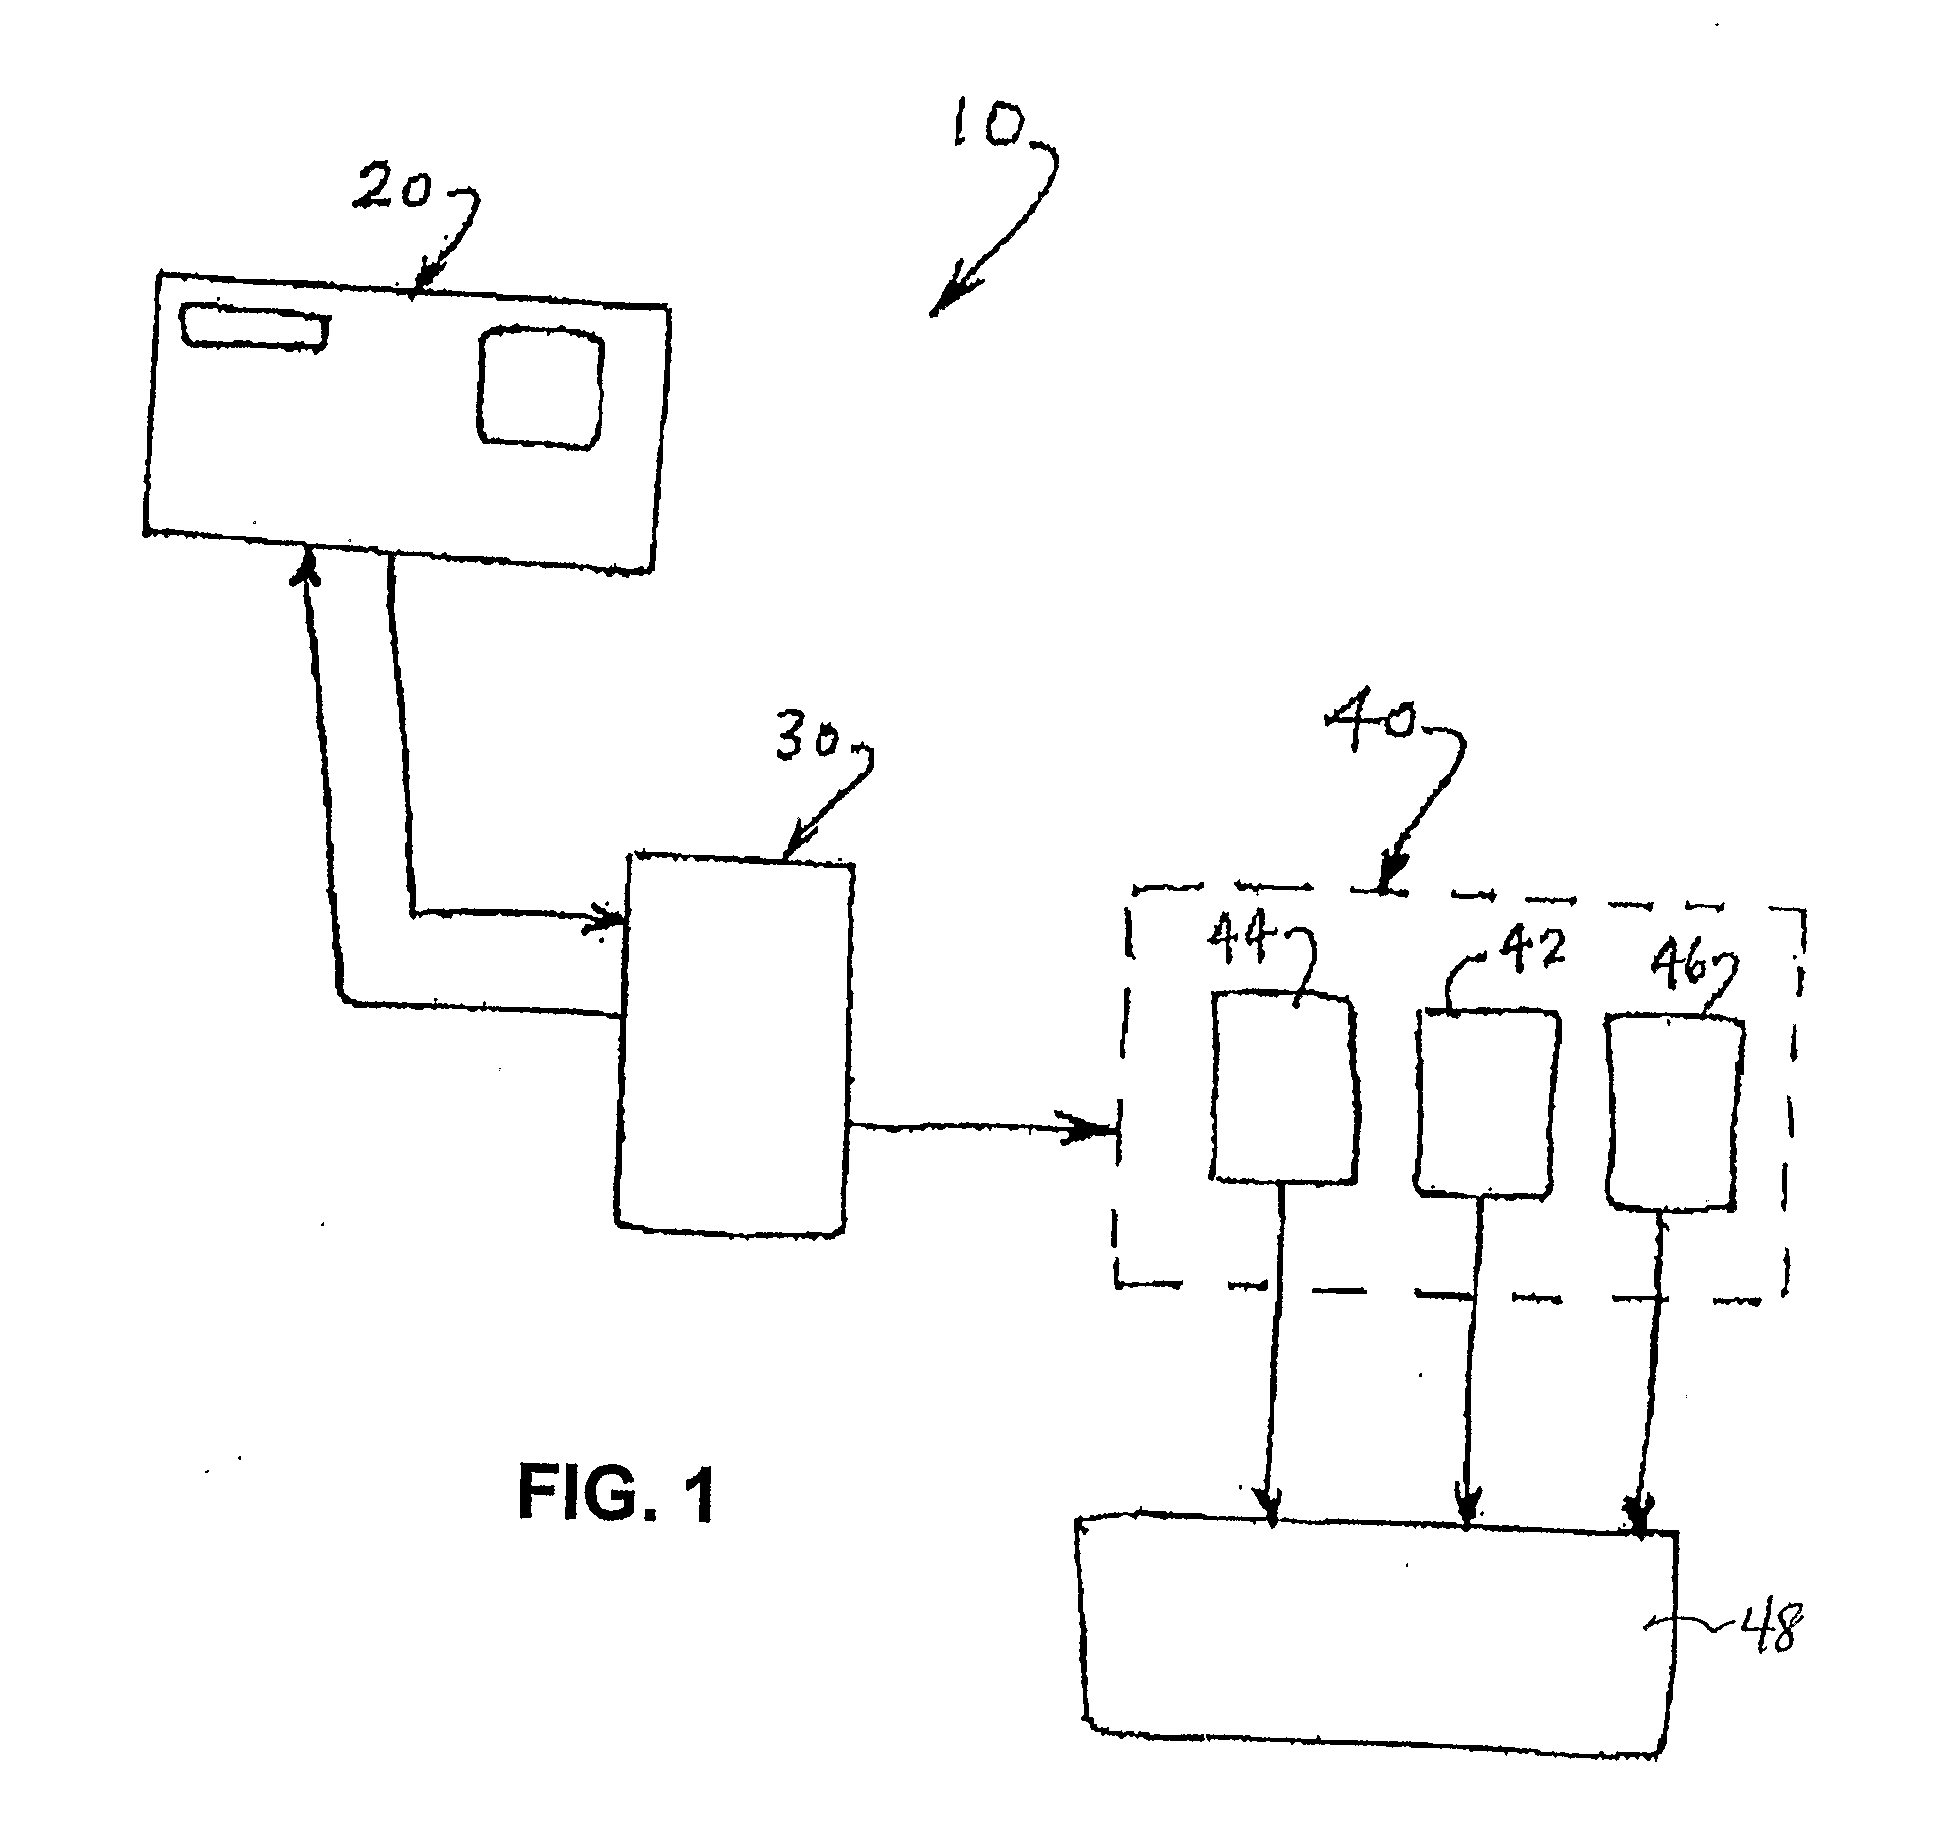 Balanced Physiological Monitoring and Treatment System